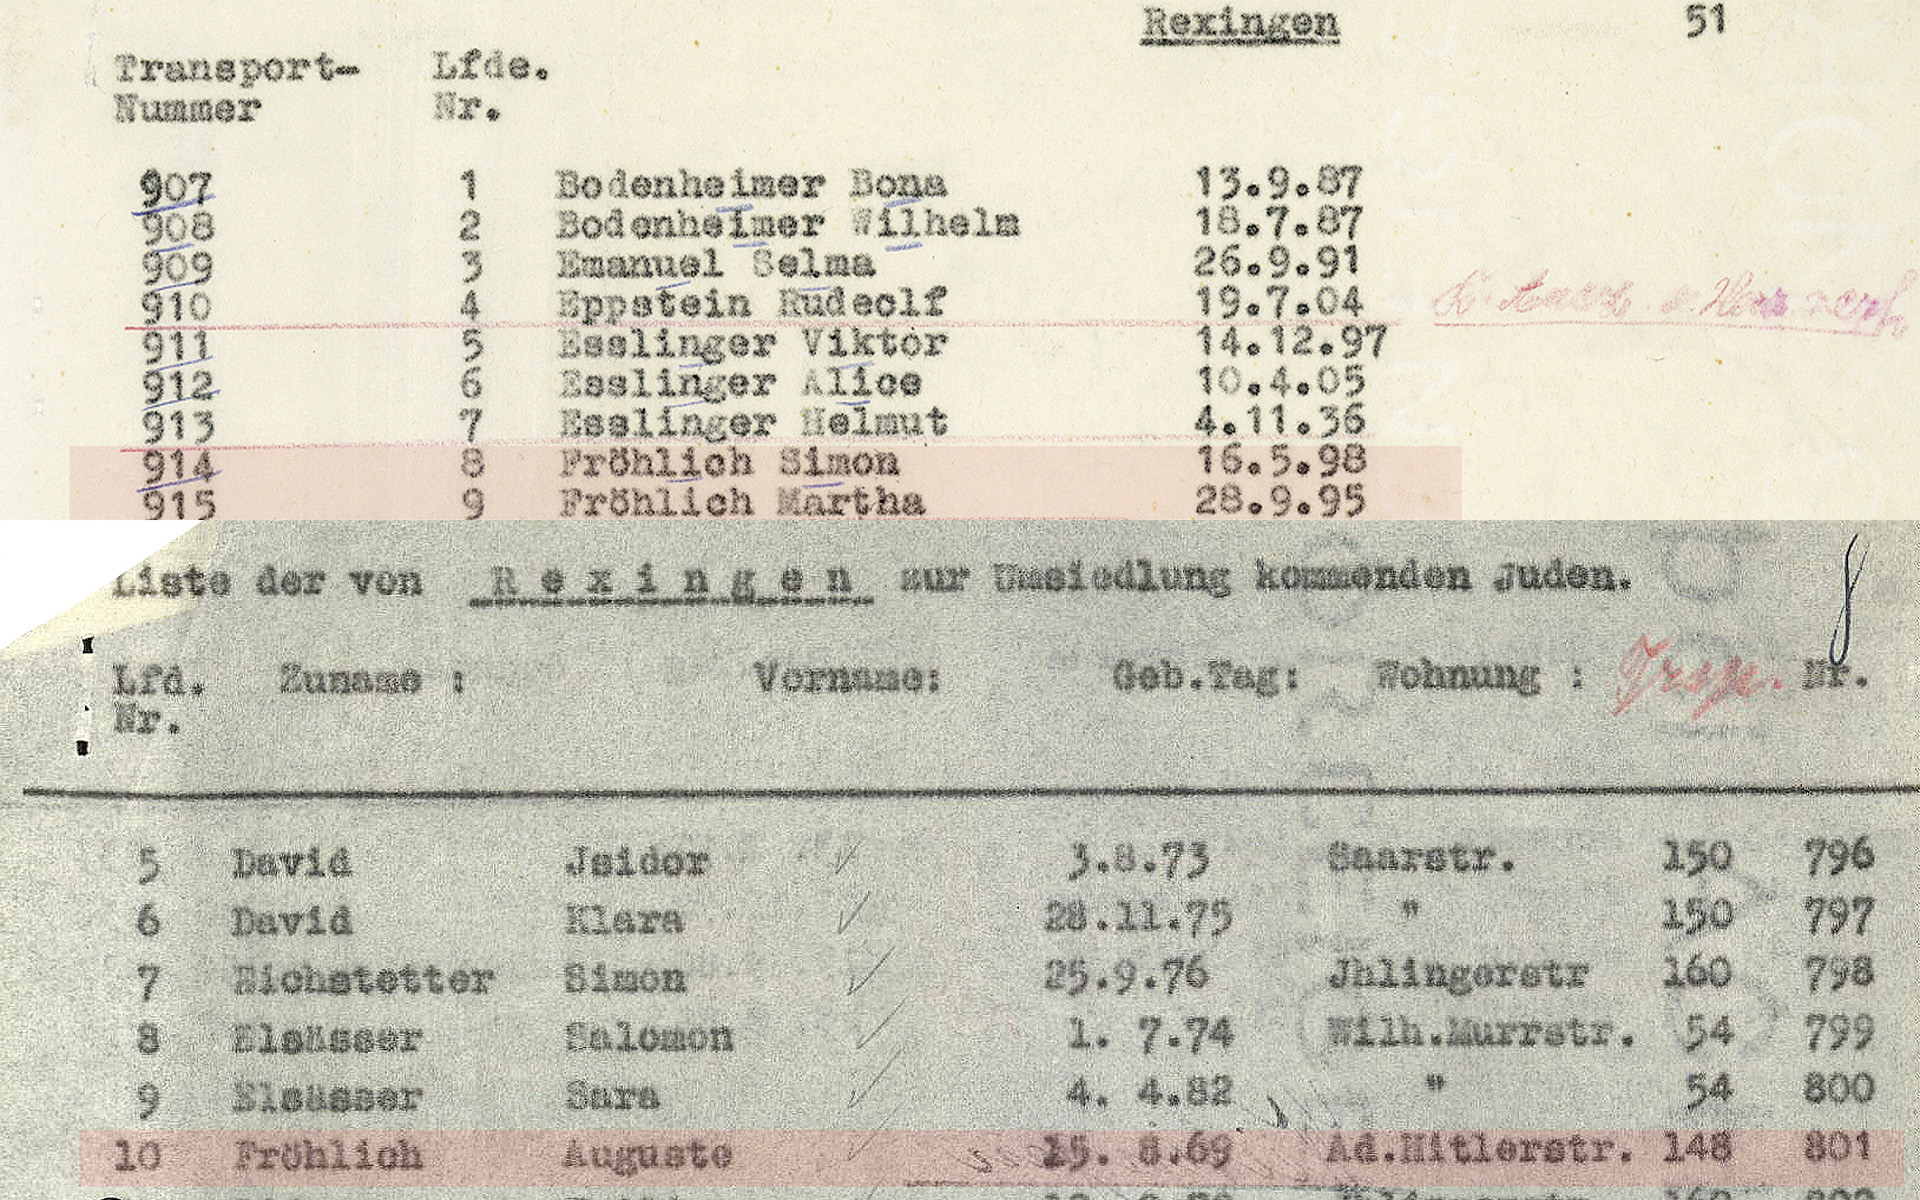 Excerpts from the transport lists to Riga and Theresienstadt with the names of Martha, Simon and Auguste Fröhlich